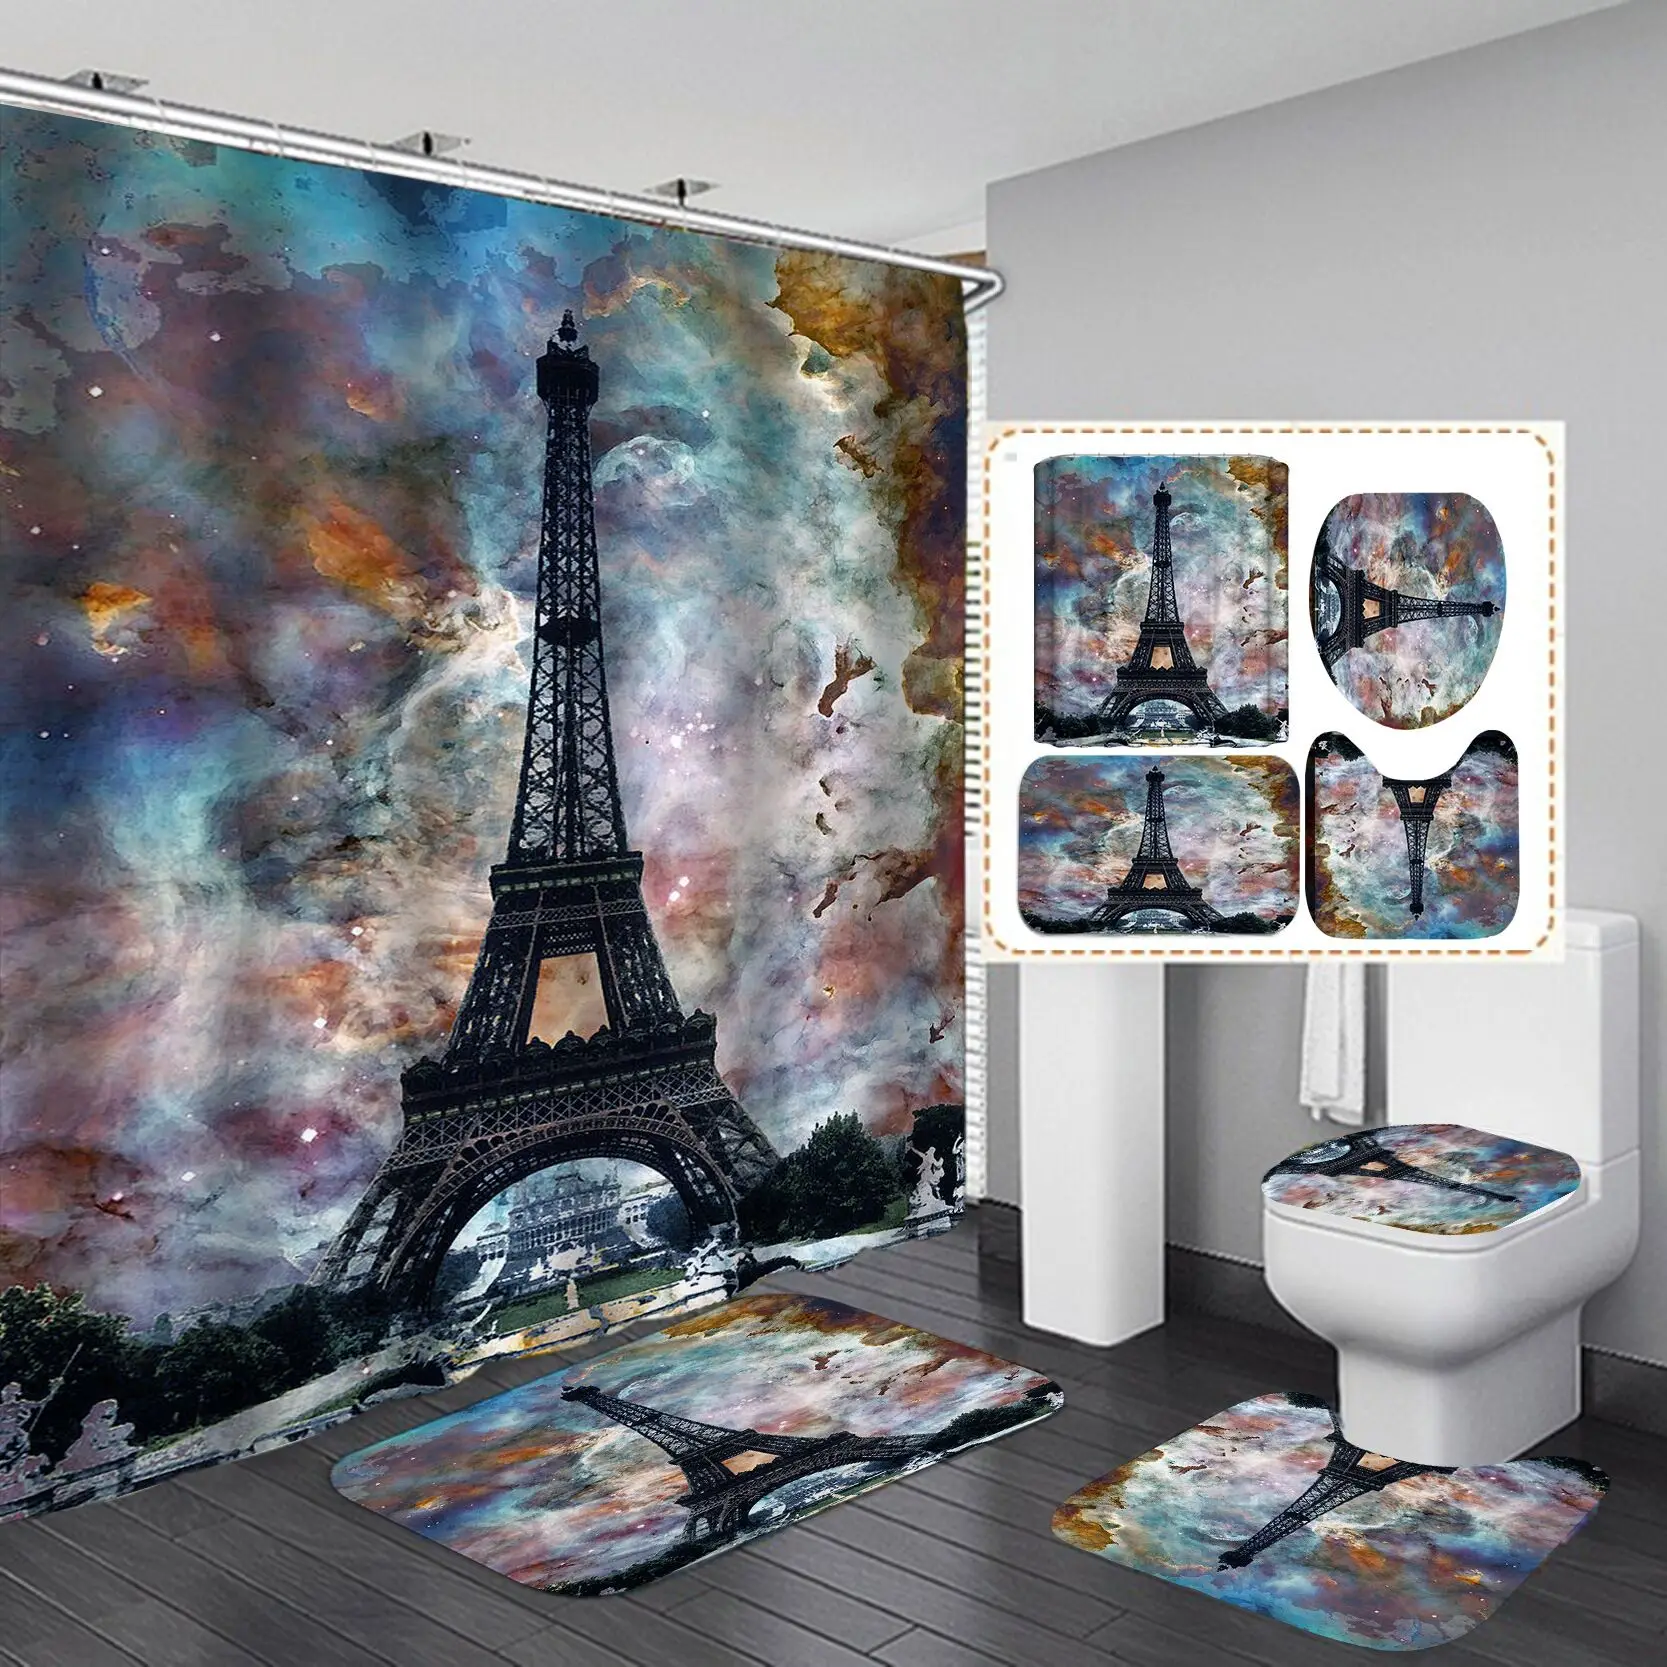 
Fashionable custom 3D printed shpwer curtain waterproof polyester fabric shower curtain sets 